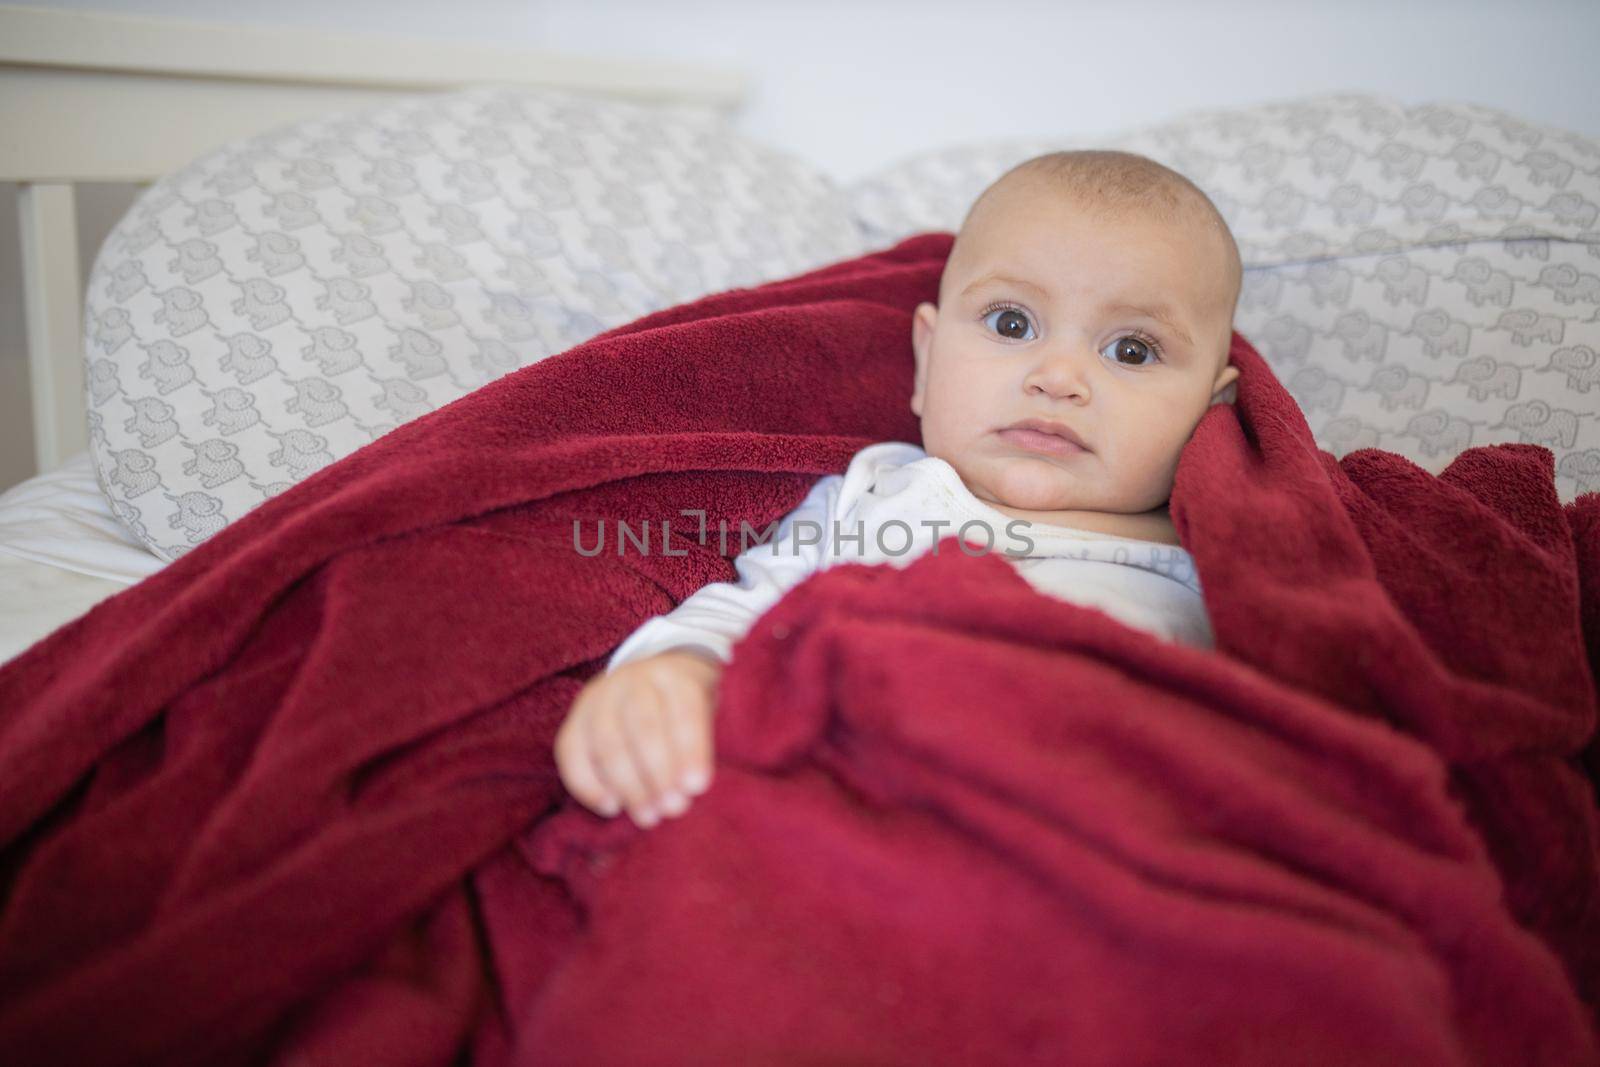 Relaxed-looking baby covered with a red blanket and lying on a bed by Kanelbulle